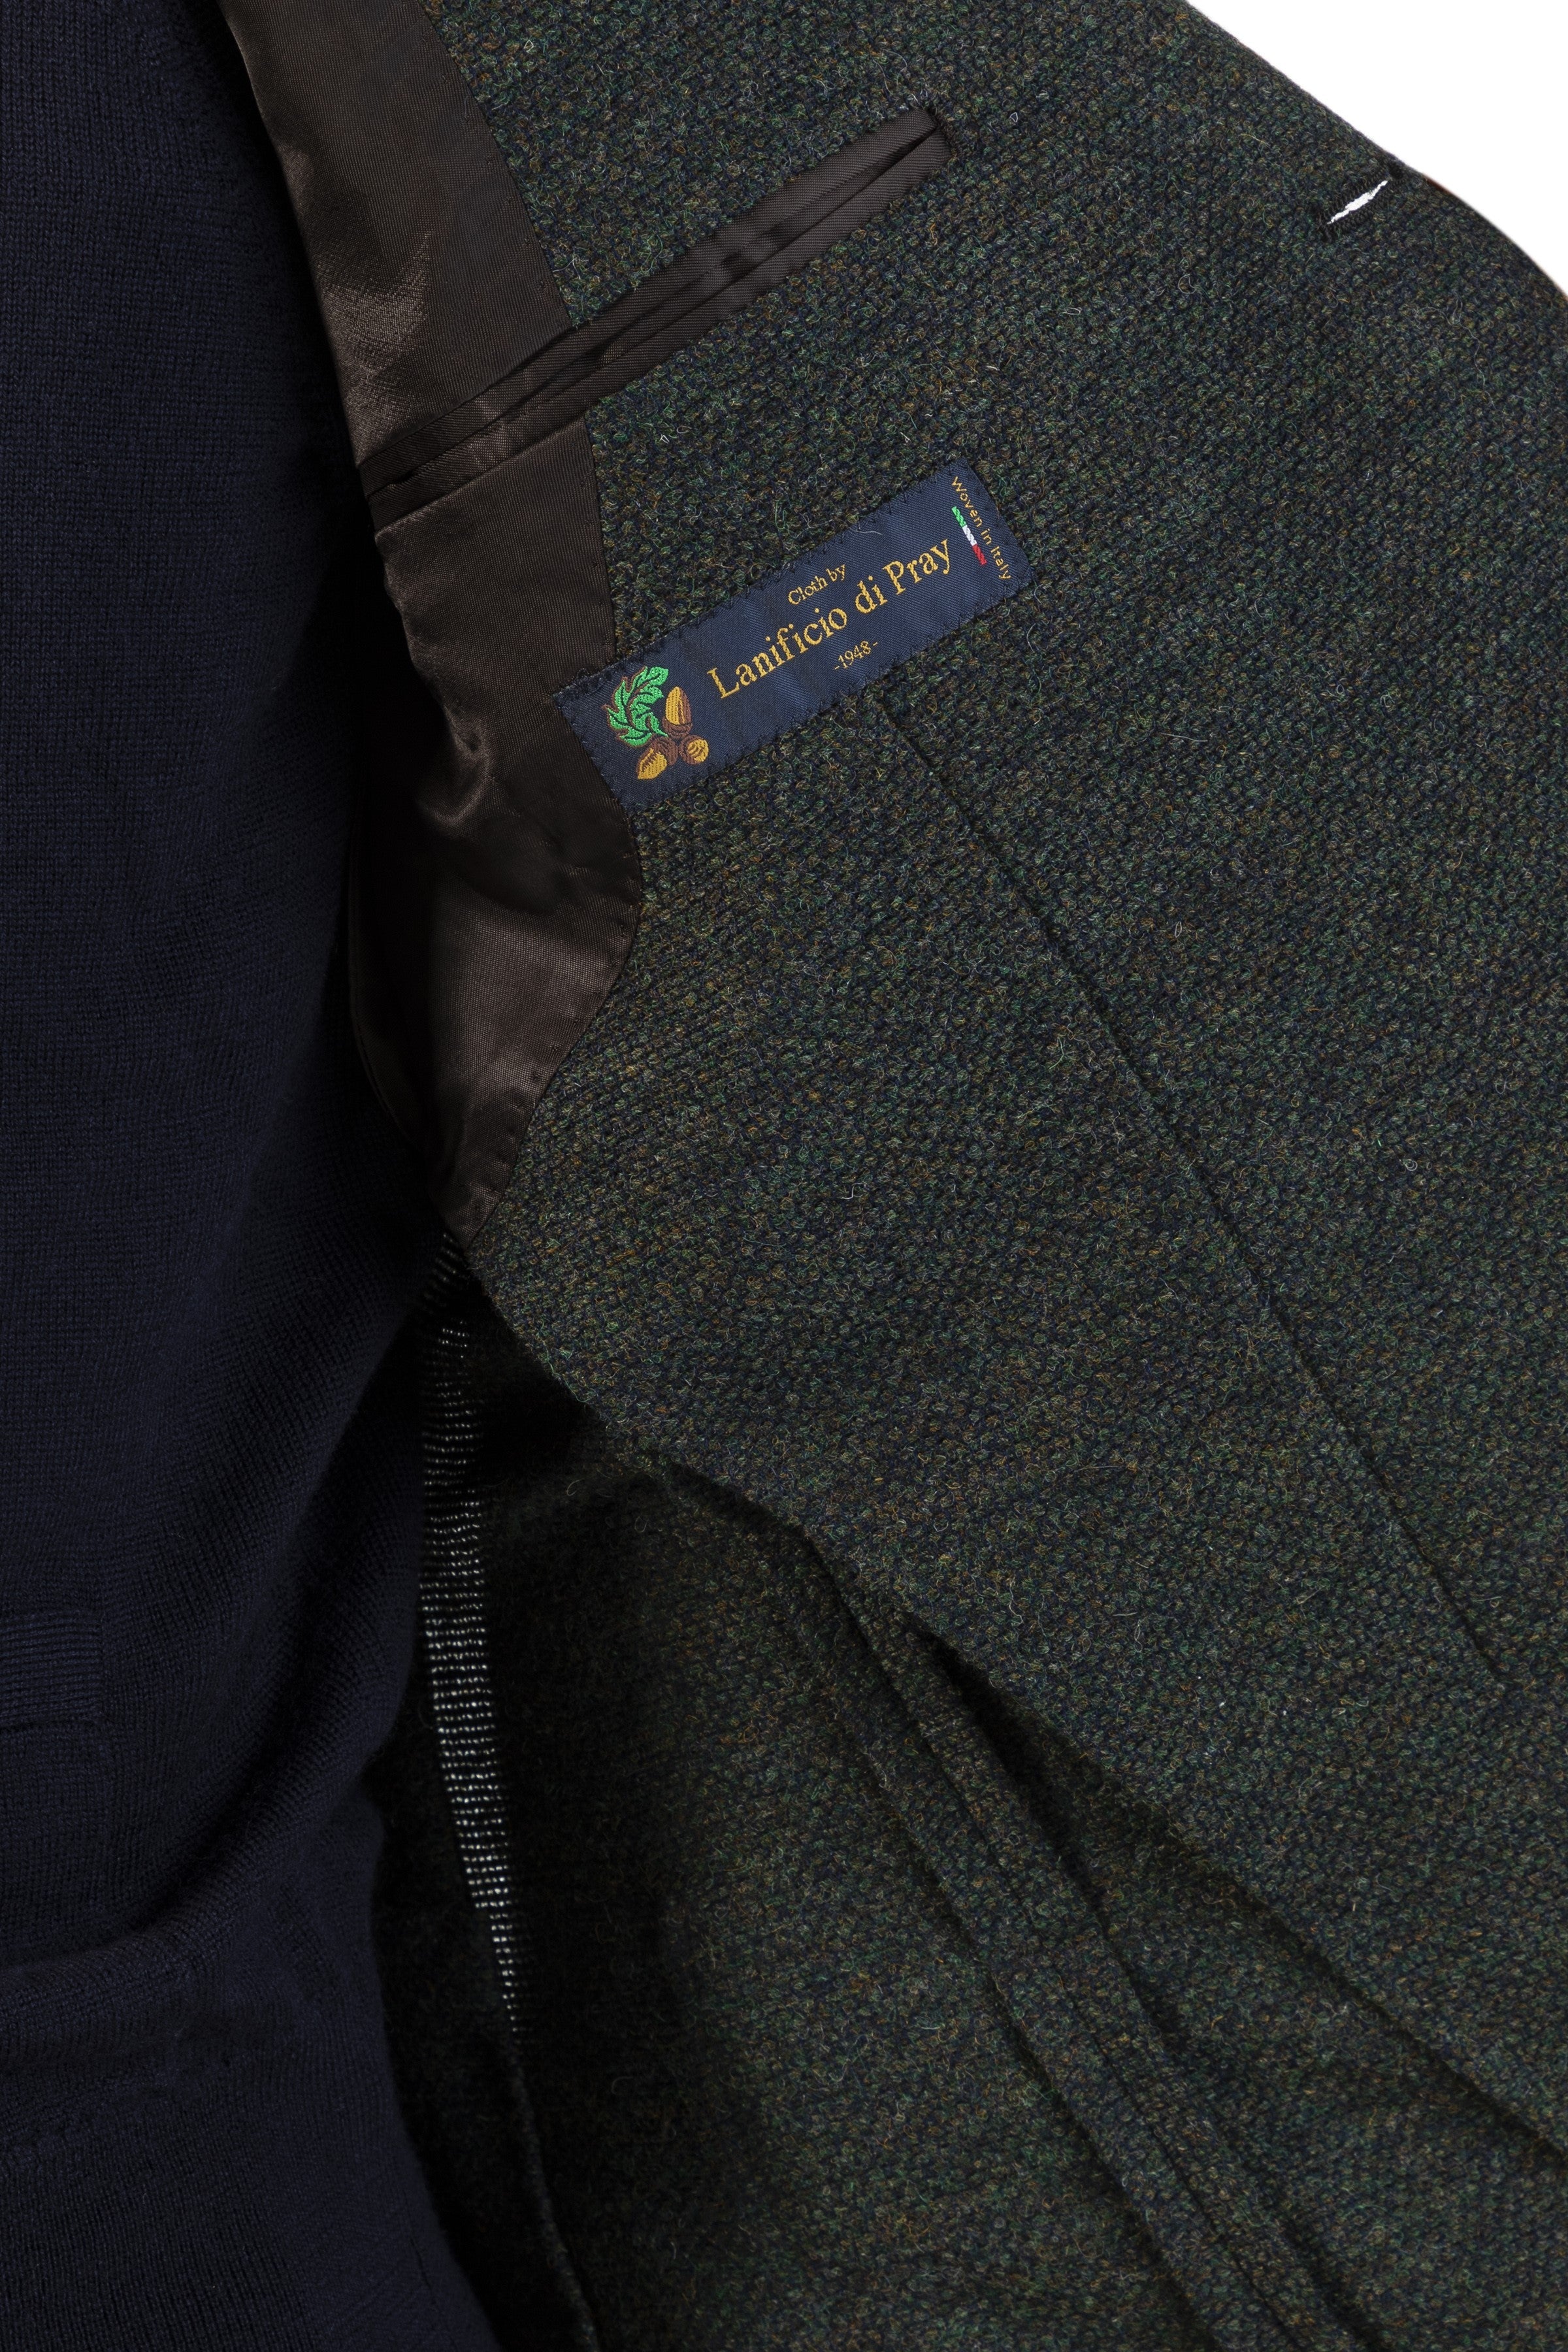 The Armoury by Ring Jacket Model 3 Olive Di Pray Leno Weave Shetland Wool Sport Coat